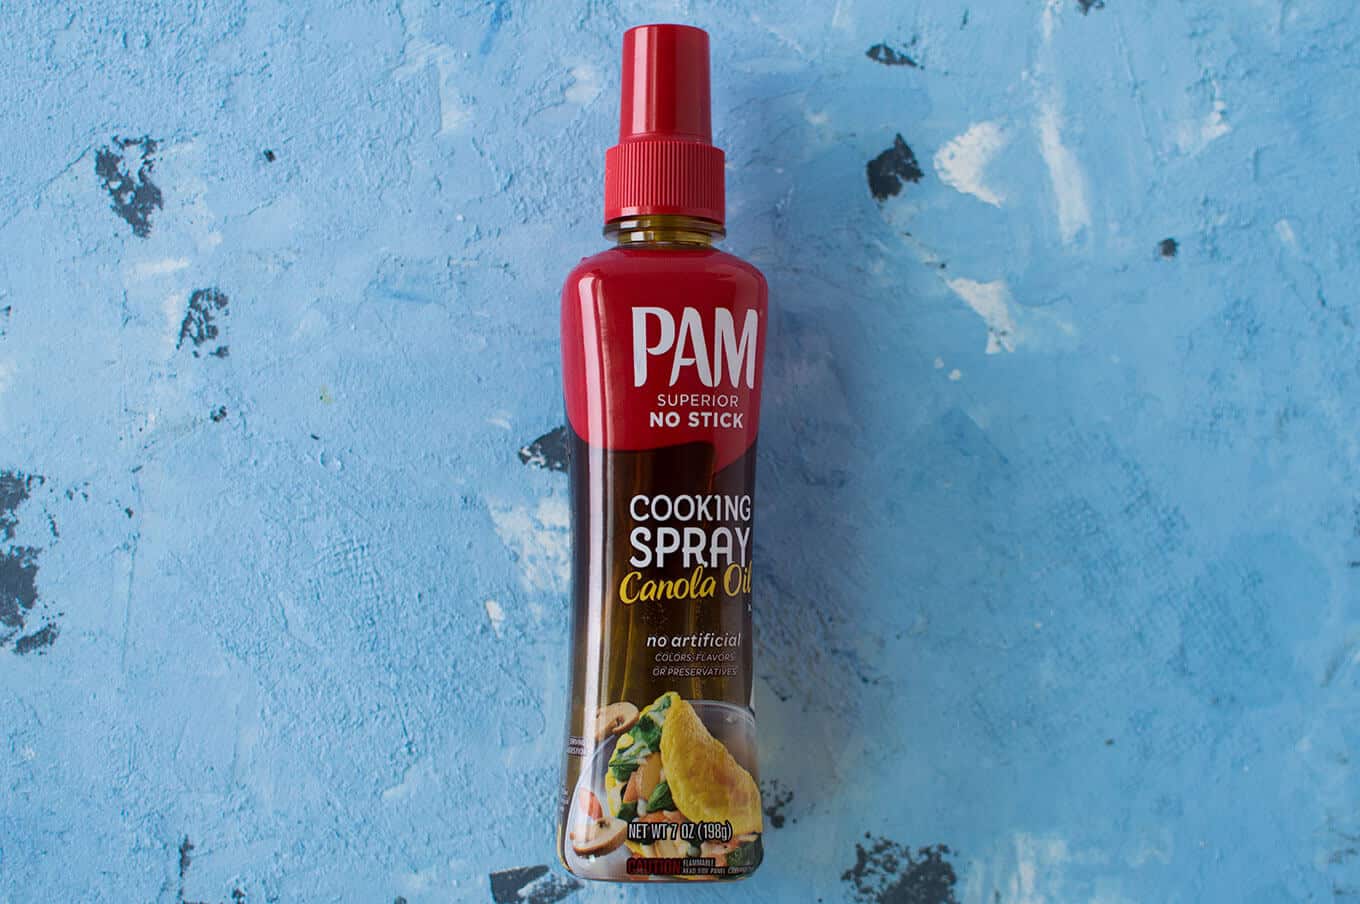 A bottle of cooking spray.